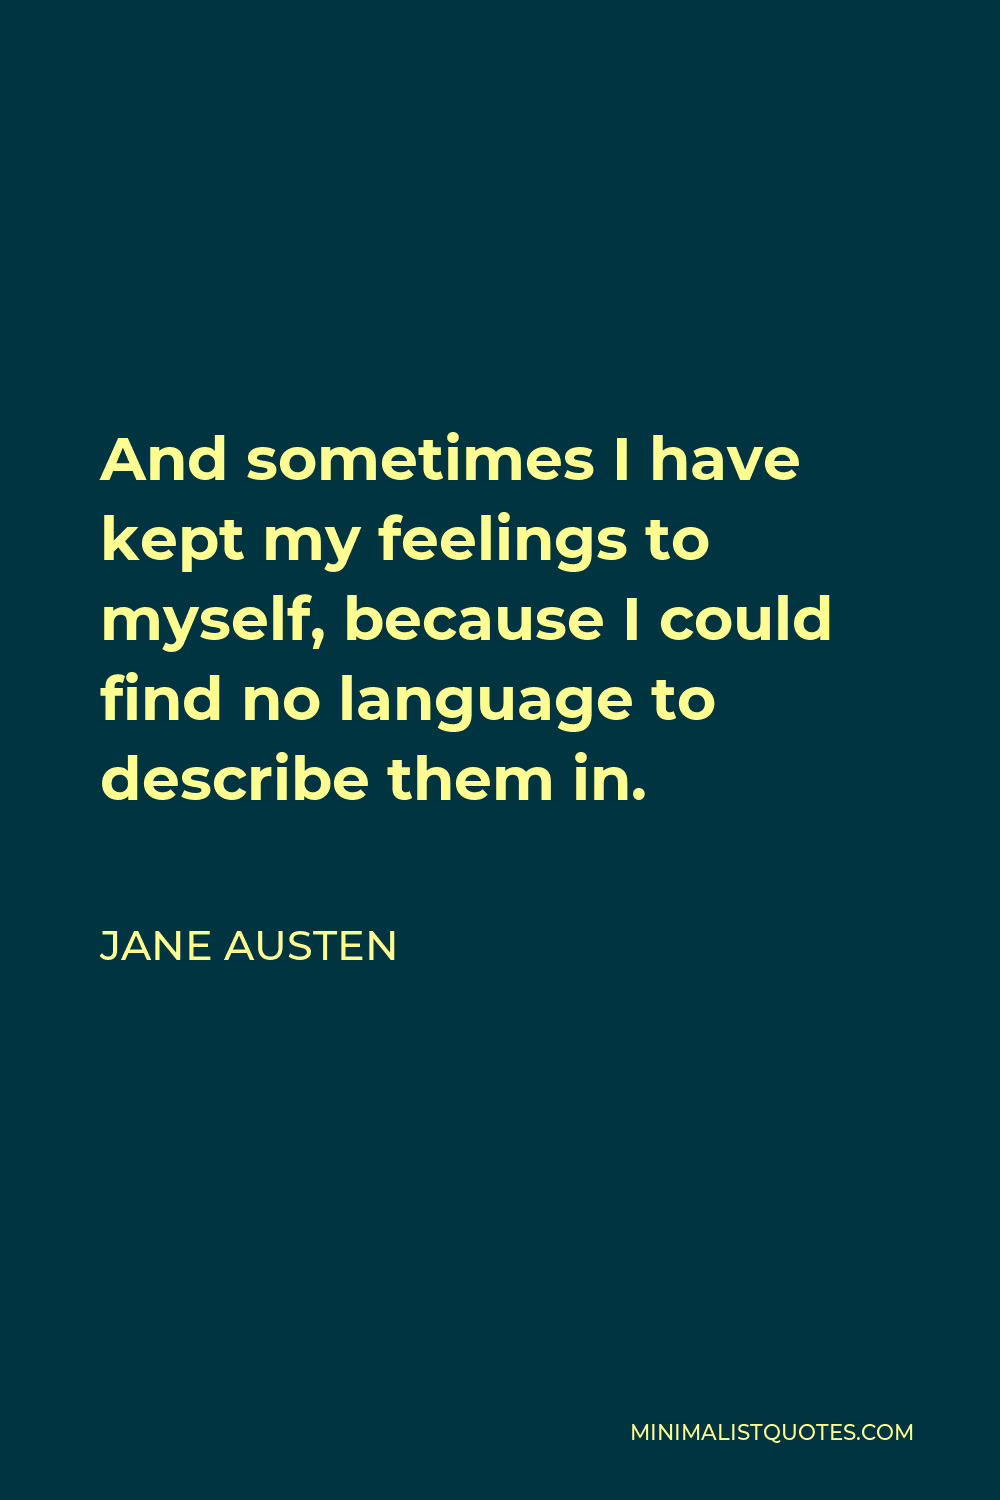 Jane Austen Quote - And sometimes I have kept my feelings to myself, because I could find no language to describe them in.